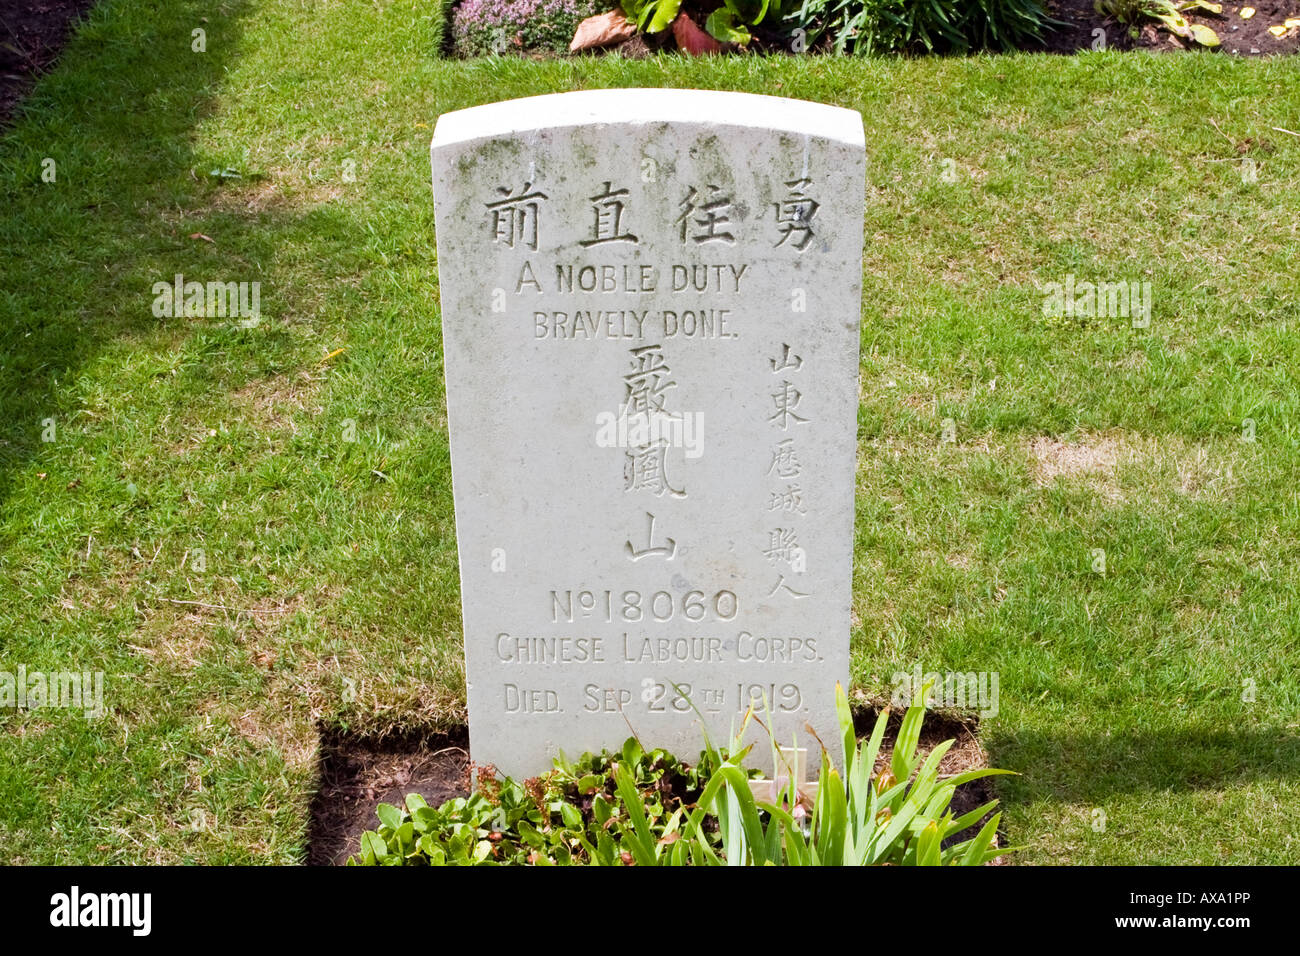 Chinese Labour Corps grave in British Military Cemetery near Ypres Belgium Stock Photo